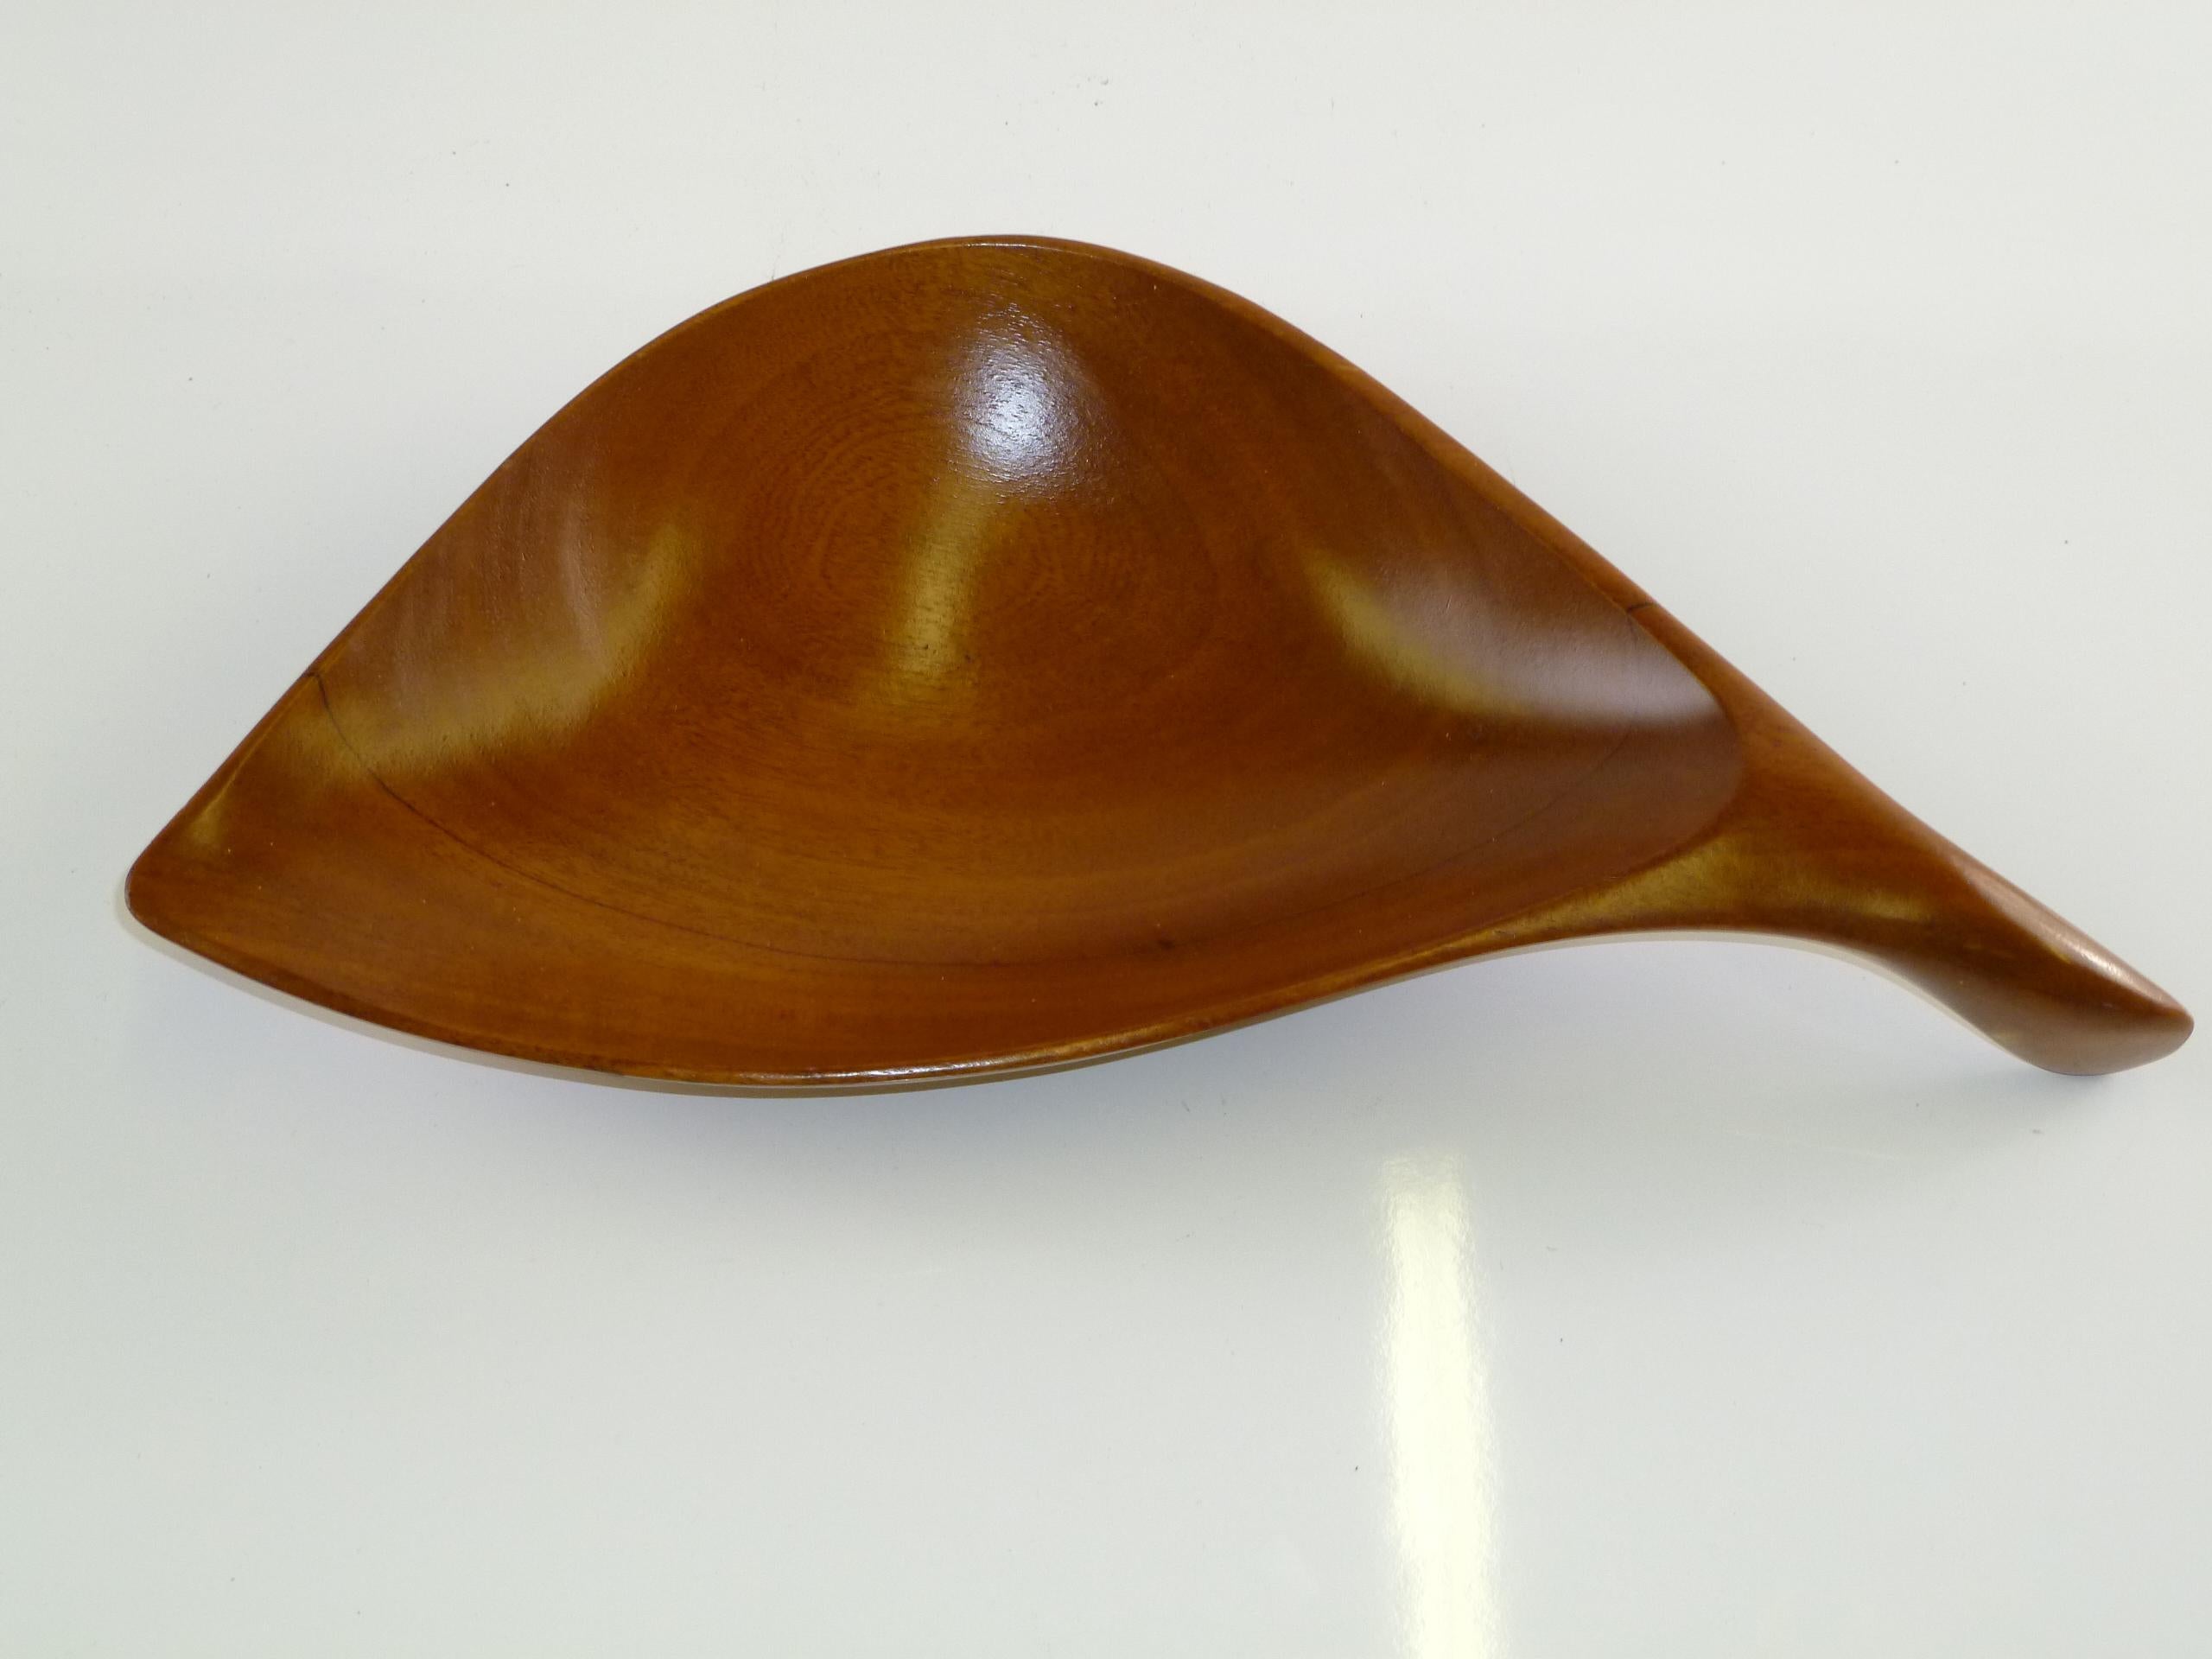 REDUCED FROM $750....Turned and shaped by Emil Milan, a handled leaf shaped bowl made of polished Benin Teak. A wood artist noted for midcentury organic shapes along with known Pennsylvania contemporaries Wharton Esherick and George Nakashima, he